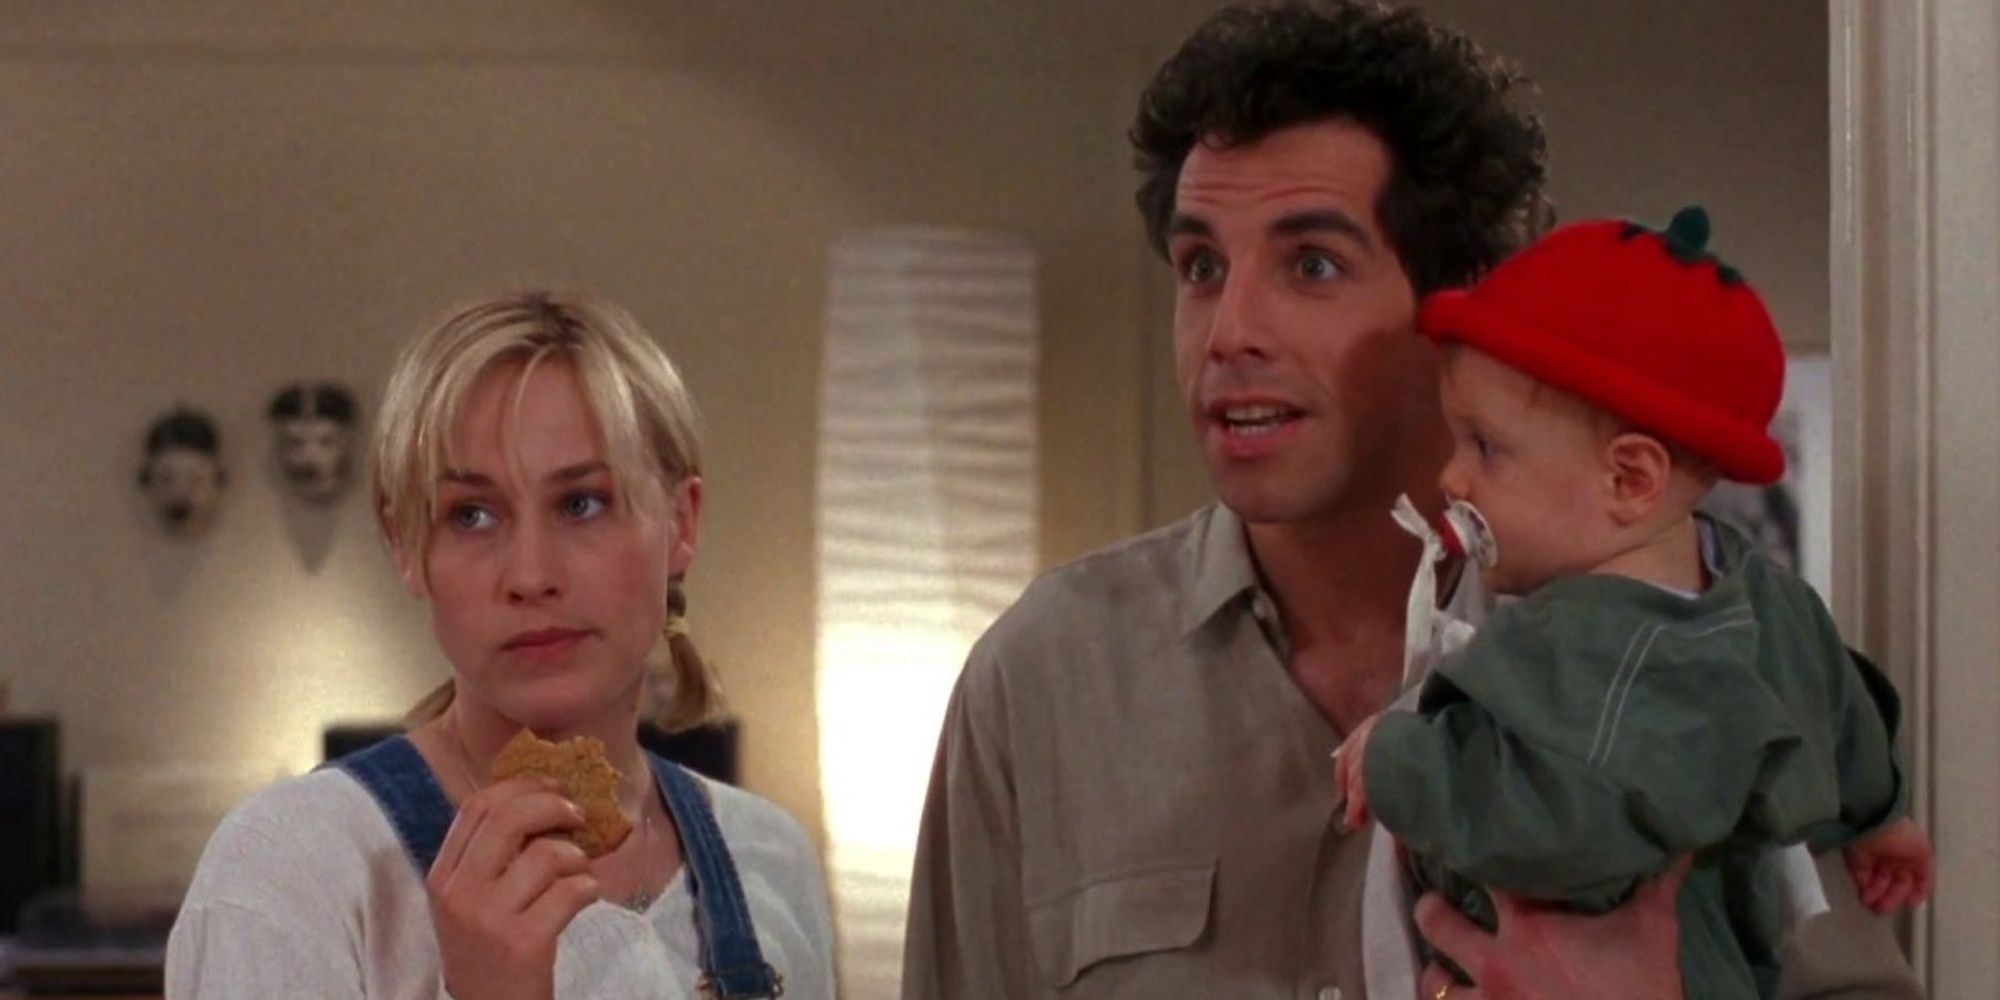 Patricia Arquette and Ben Stiller as Nancy and Mel Coplin looking ahead while carrying their small child in the film Flirting with Disaster.